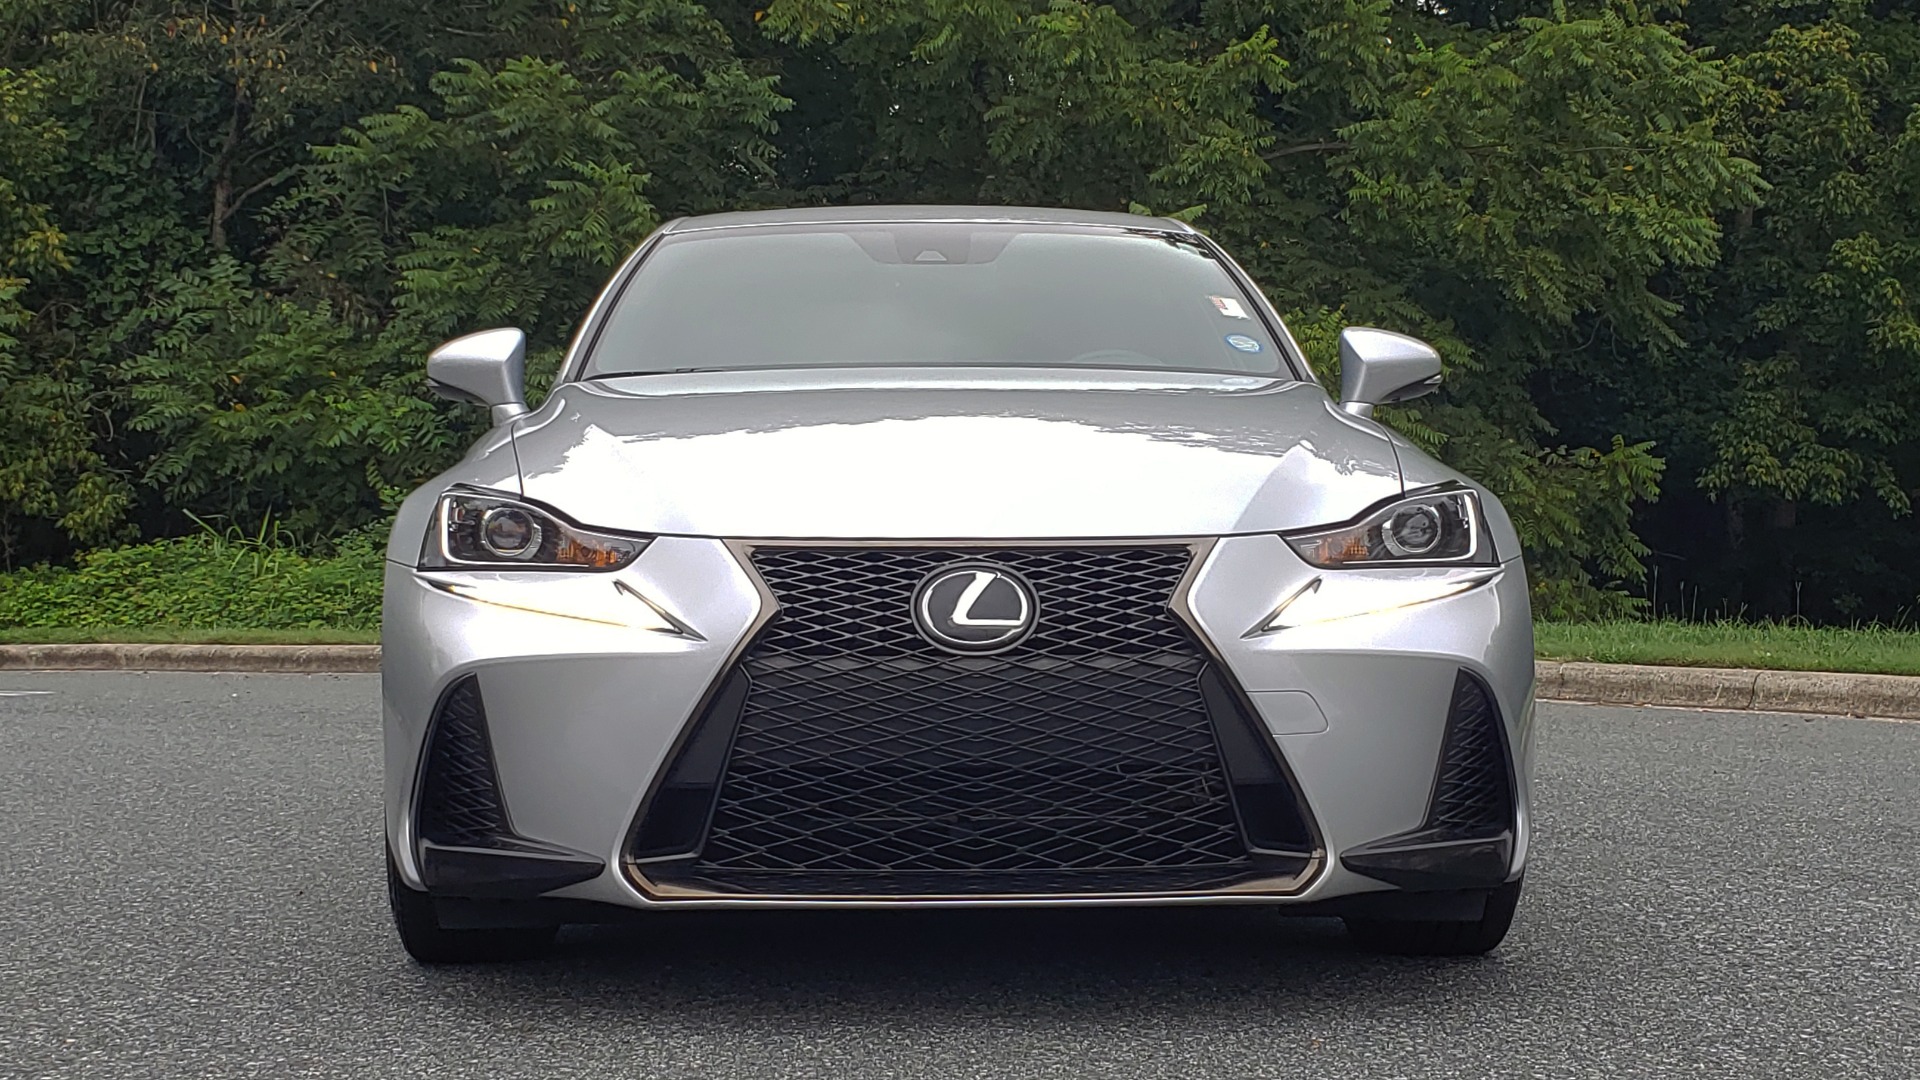 Used 2017 Lexus IS 200T F-SPORT / LEATHER / SUNROOF / 18IN WHEELS / REARVIEW for sale Sold at Formula Imports in Charlotte NC 28227 21